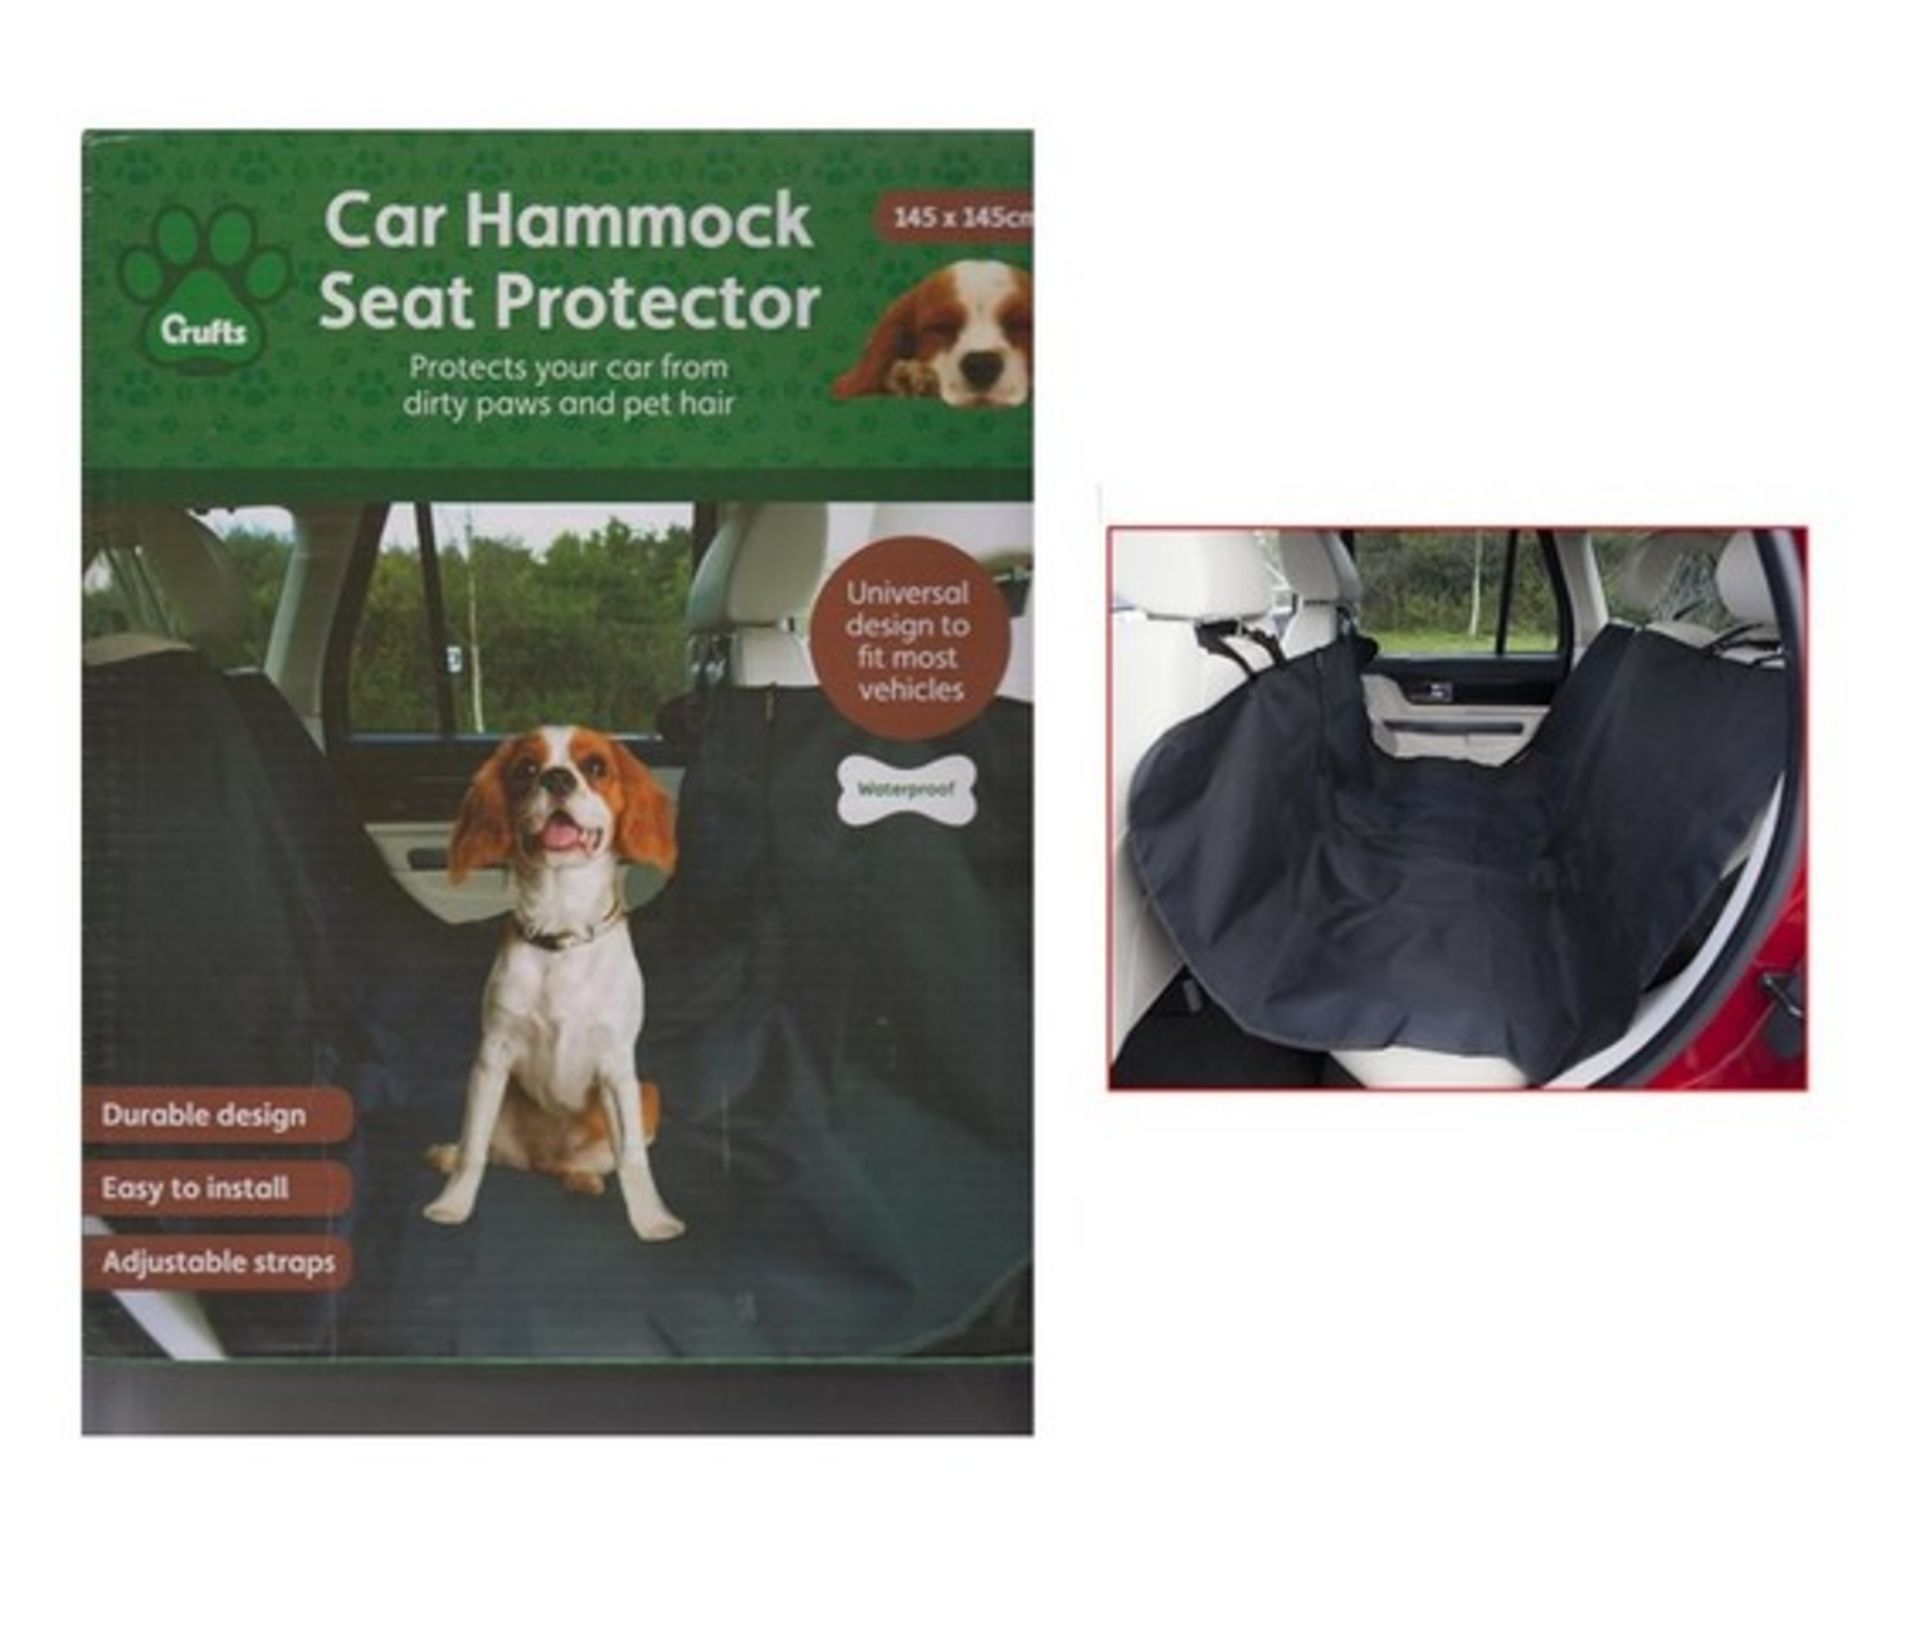 V Brand New Car Hammock Seat Protector For Dogs - Secures in Back Seat Using Four Headrest loops -